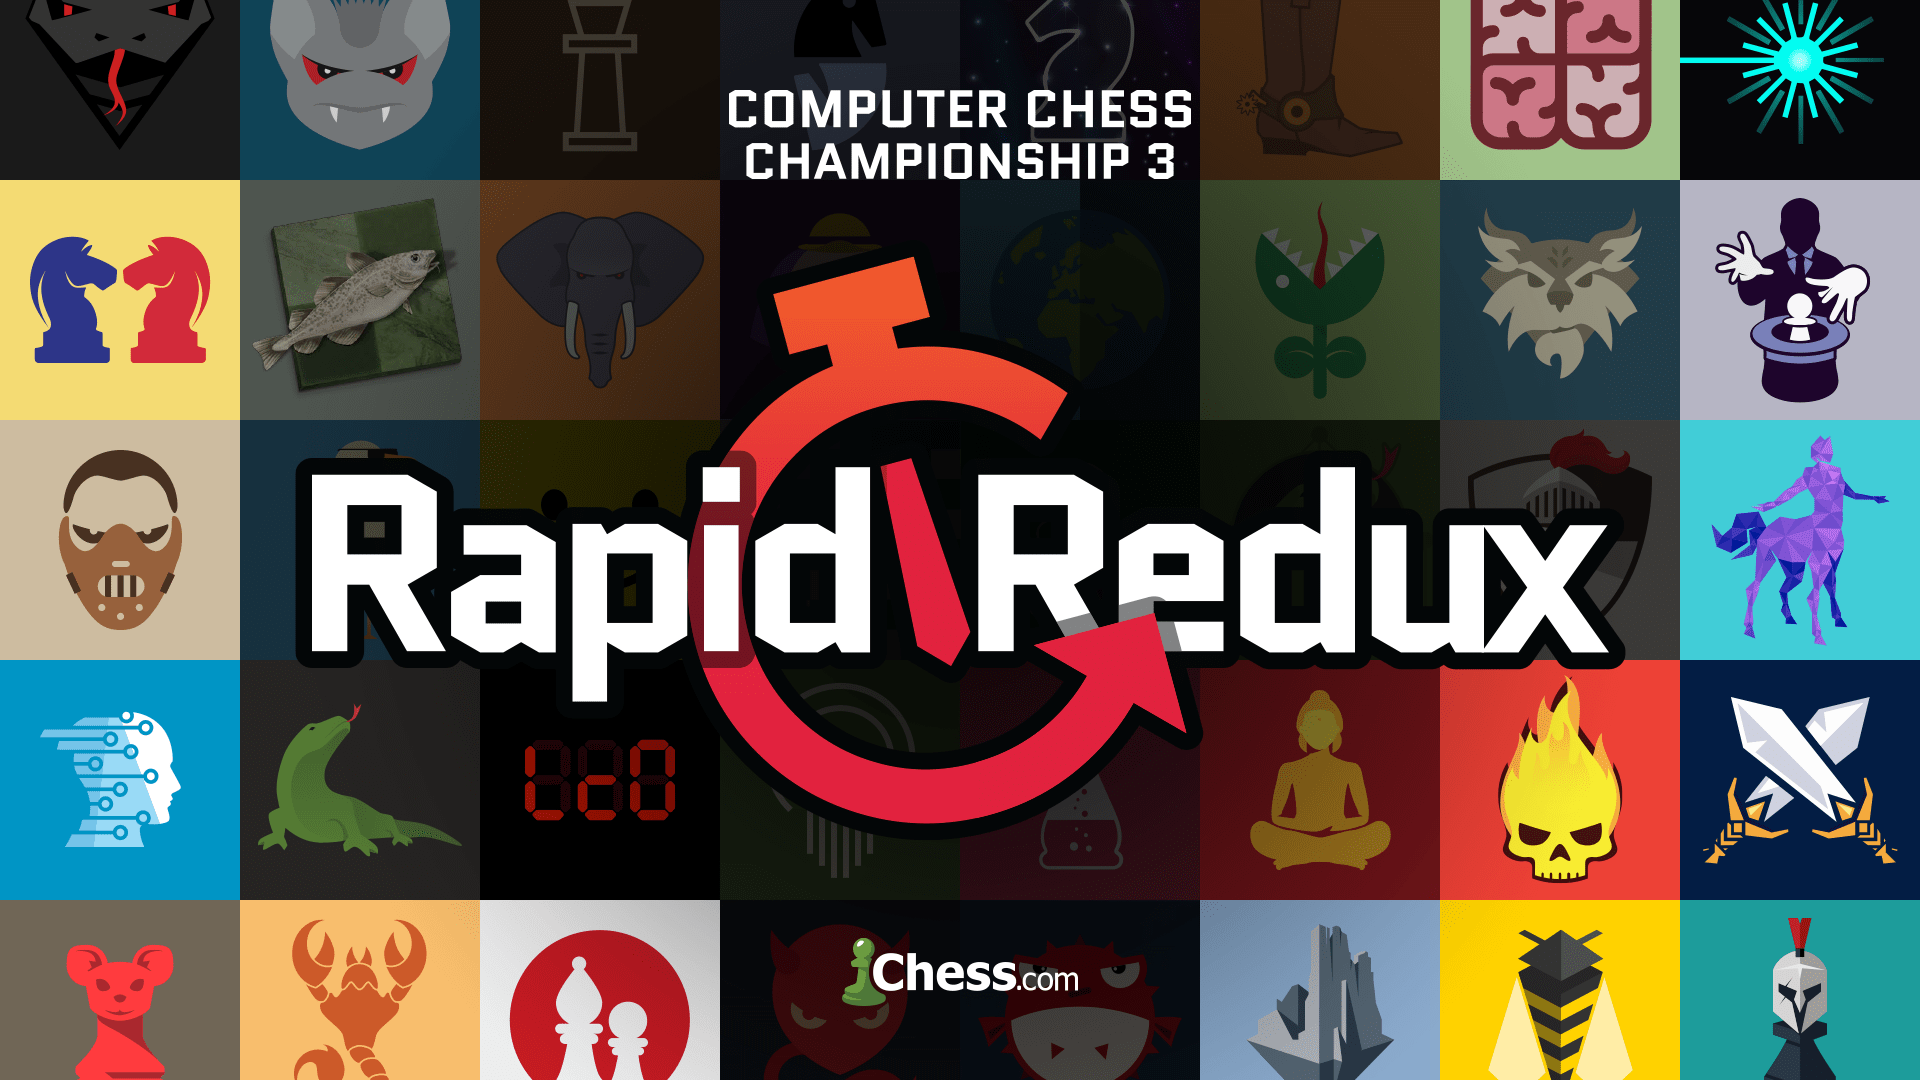 Computer Chess Championship Back For Rapid Redux - Chess.com